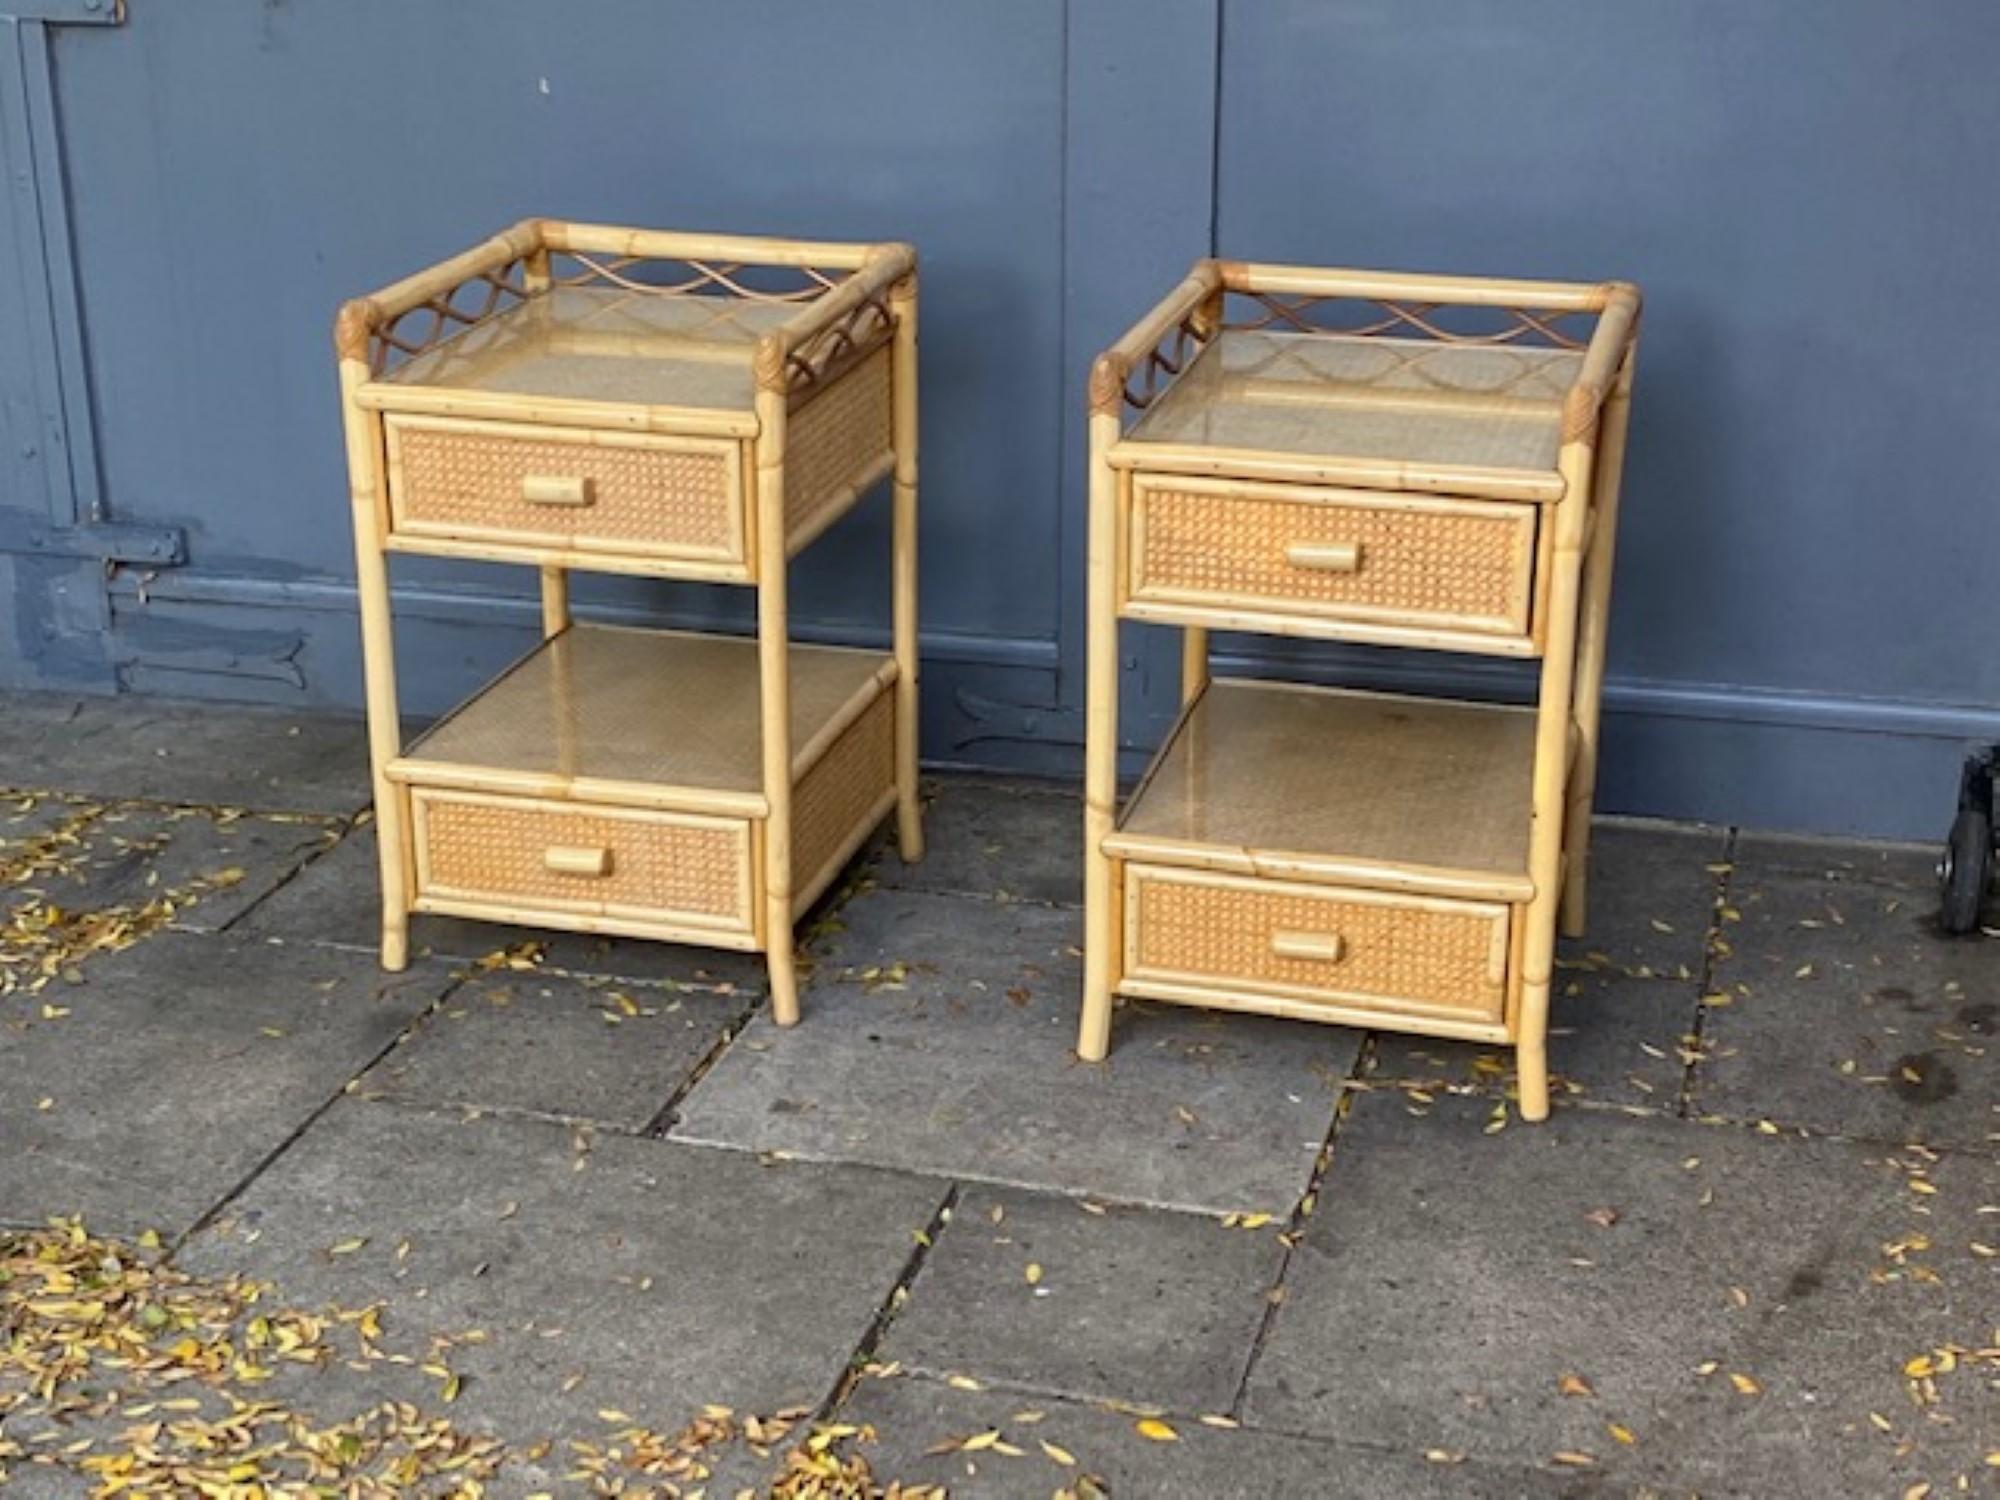 Pair of MCM Rattan / Cane Nightstands / Bedside Tables, Angraves, English, 1970s For Sale 7